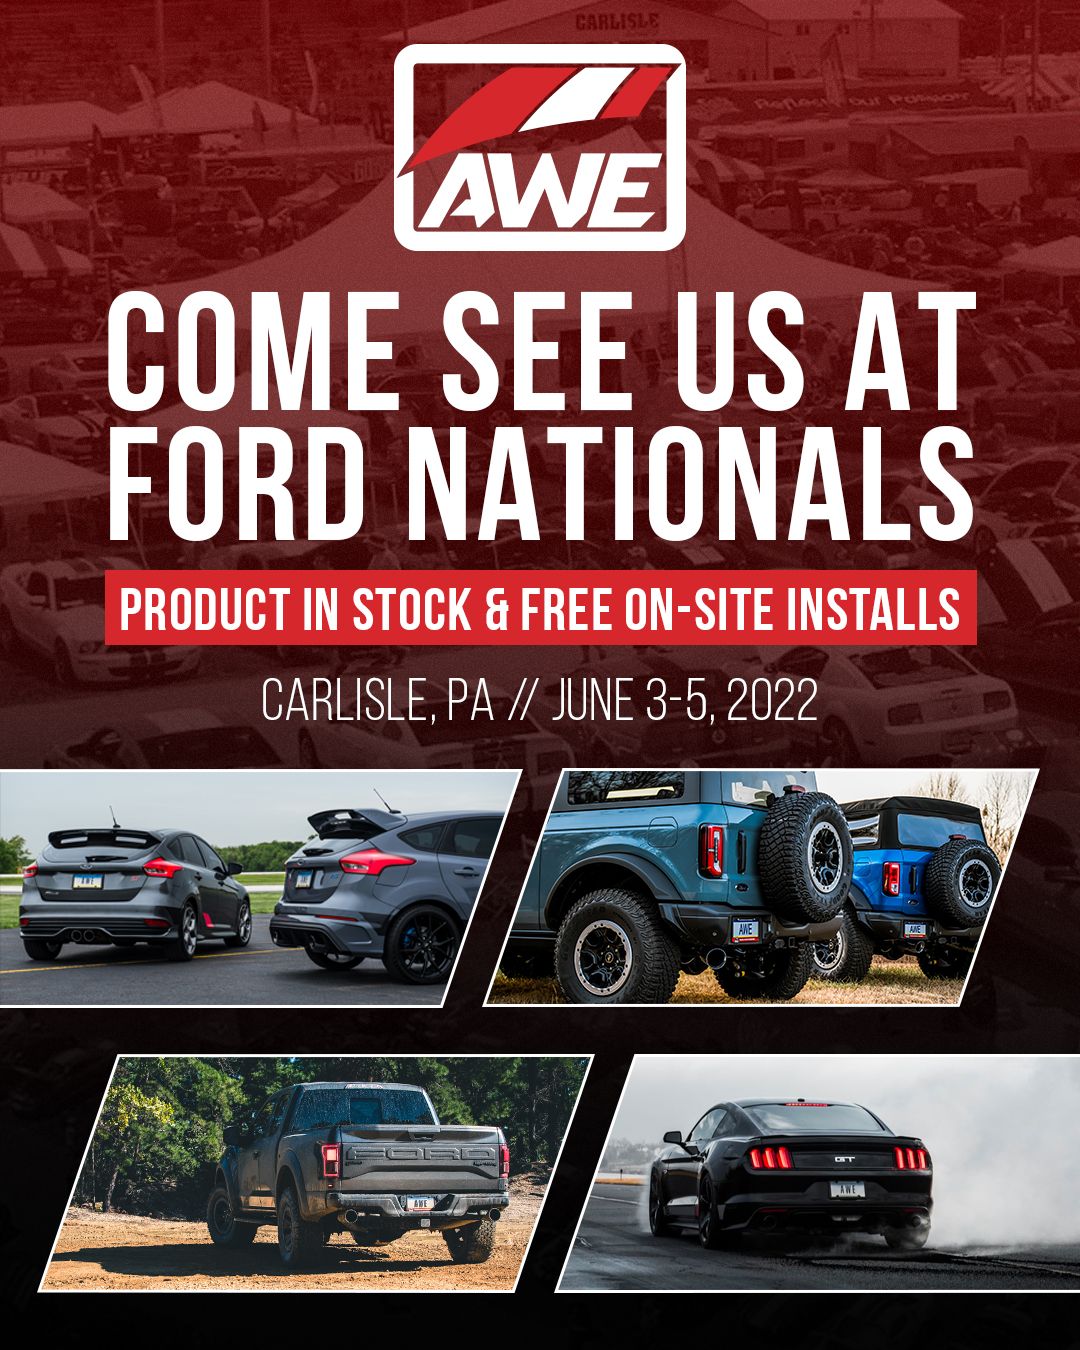 Ford Nationals Event Graphic.jpeg